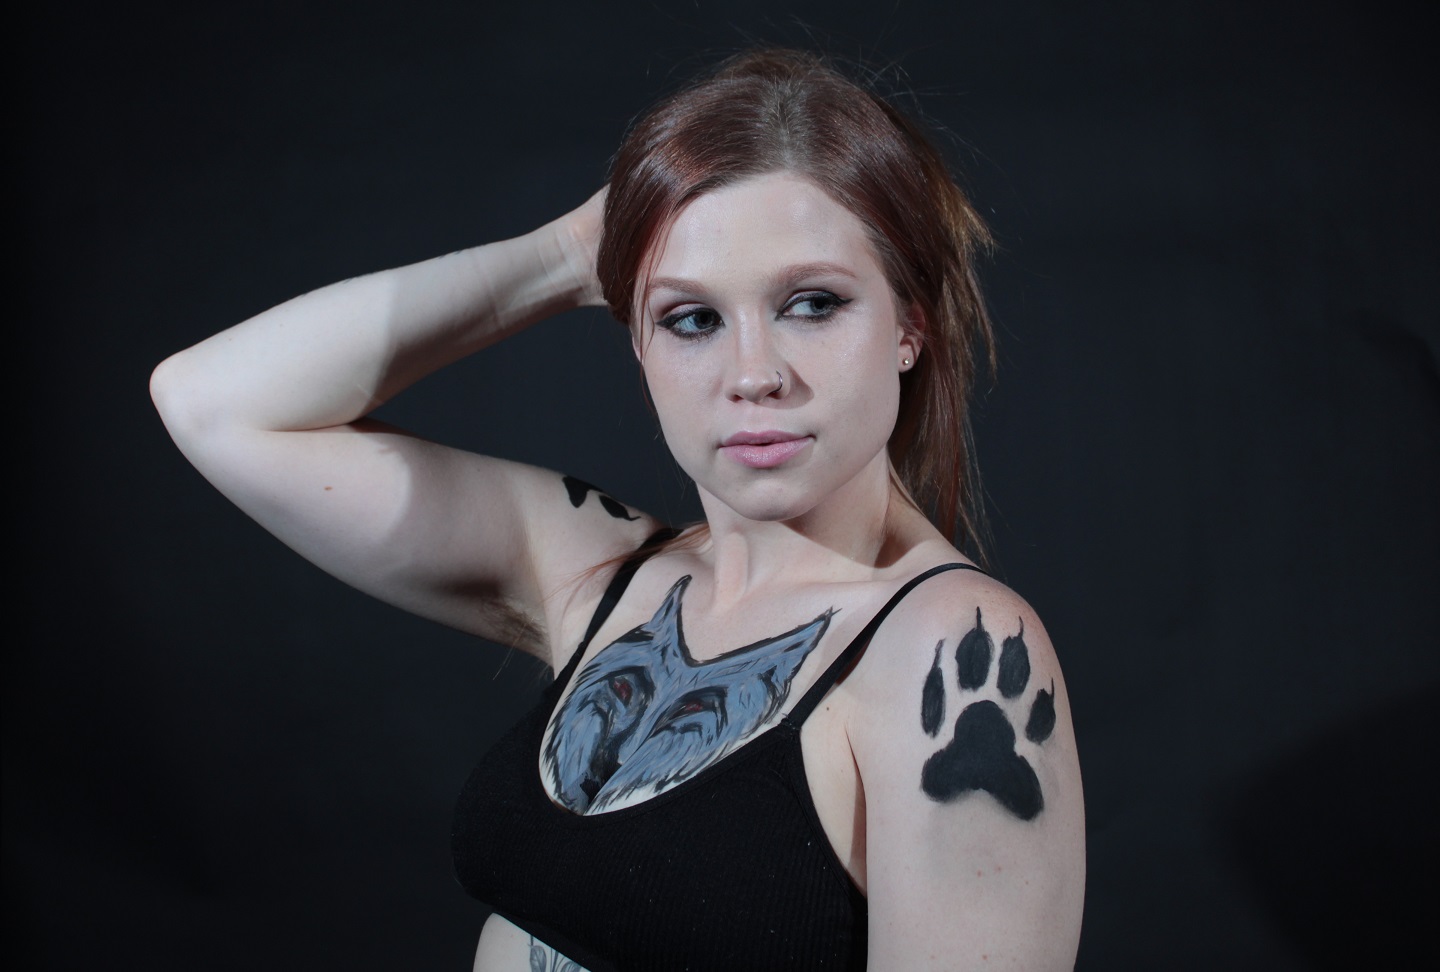 wolf face on woman's chest. Wolf paws on her shoulders